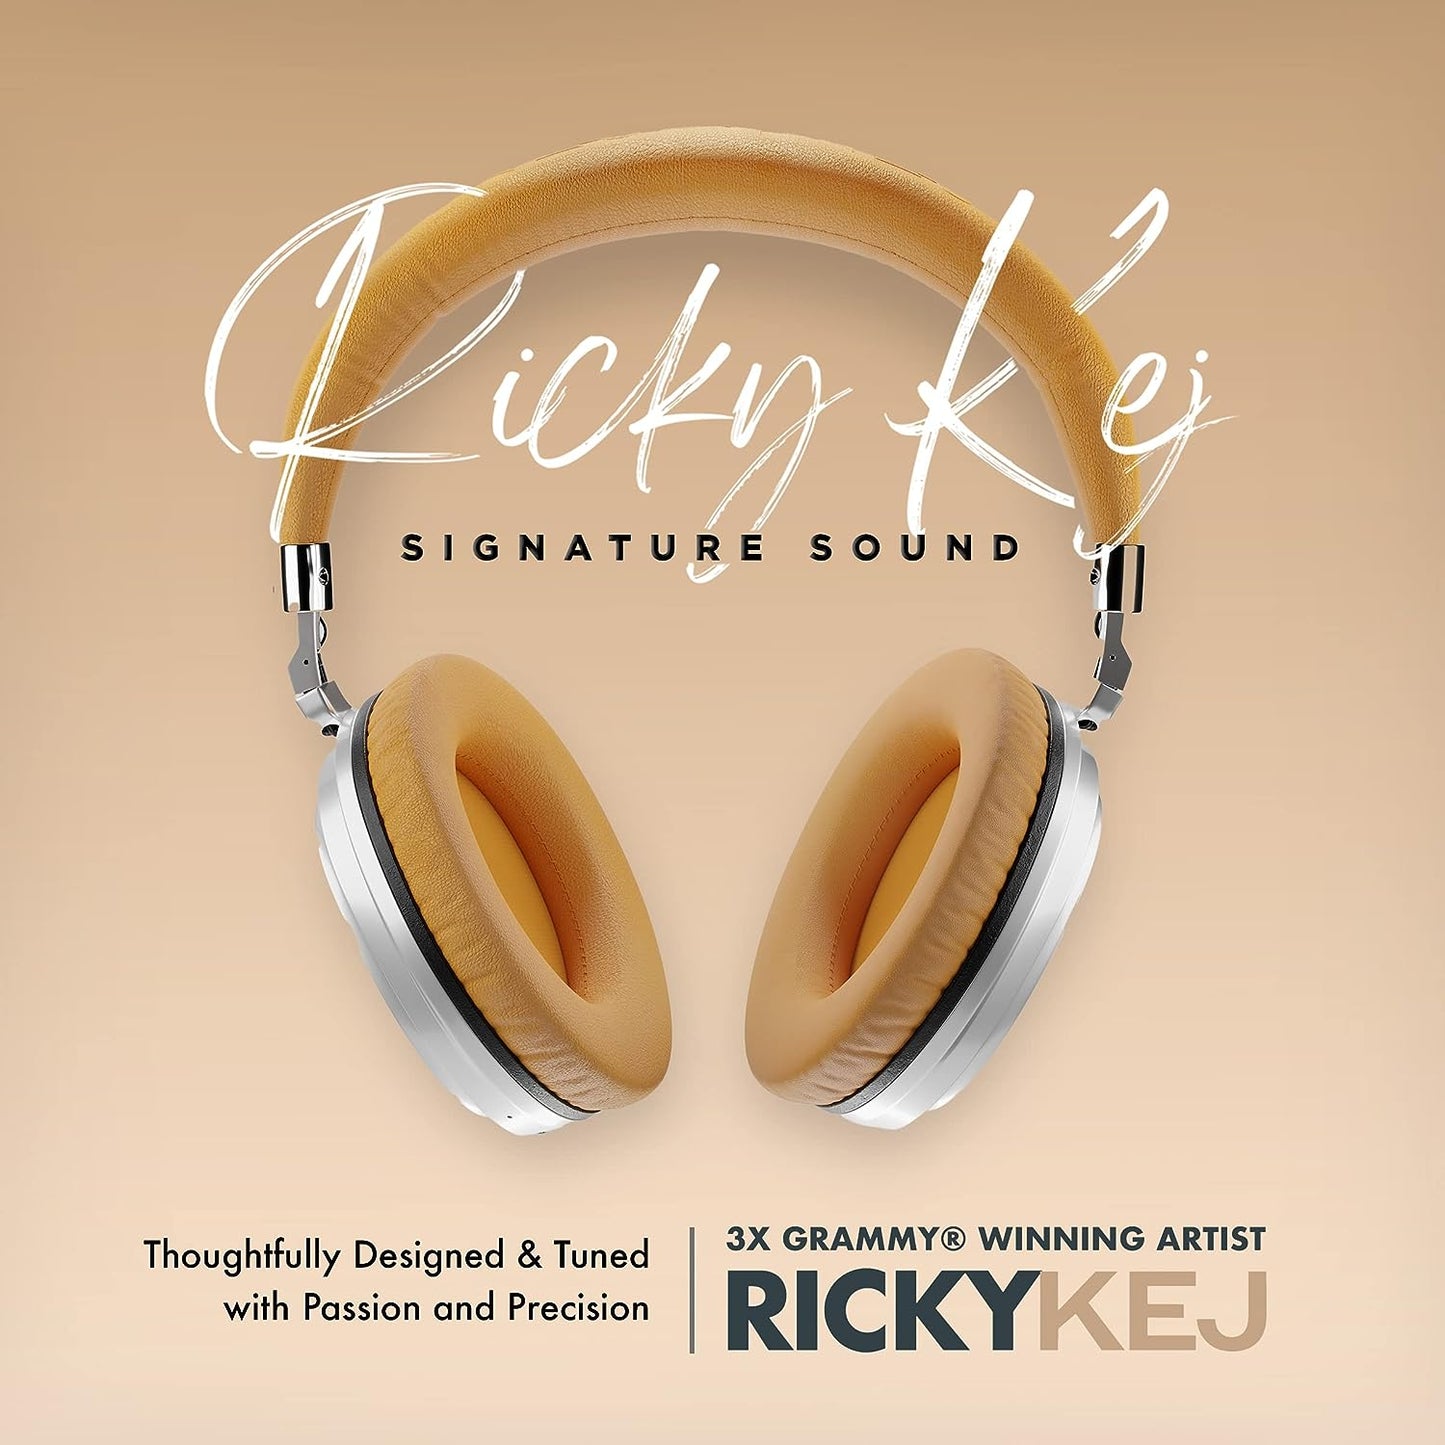 KEJBYKEJ® India's 1st and Only Headphone Brand Created by a Grammy® Winning Artist | AV900 ANC | Beige | Designed by 3X Grammy® Award Winner Ricky Kej | 20 Hours of Playtime | Android or iOS | Beige Colour